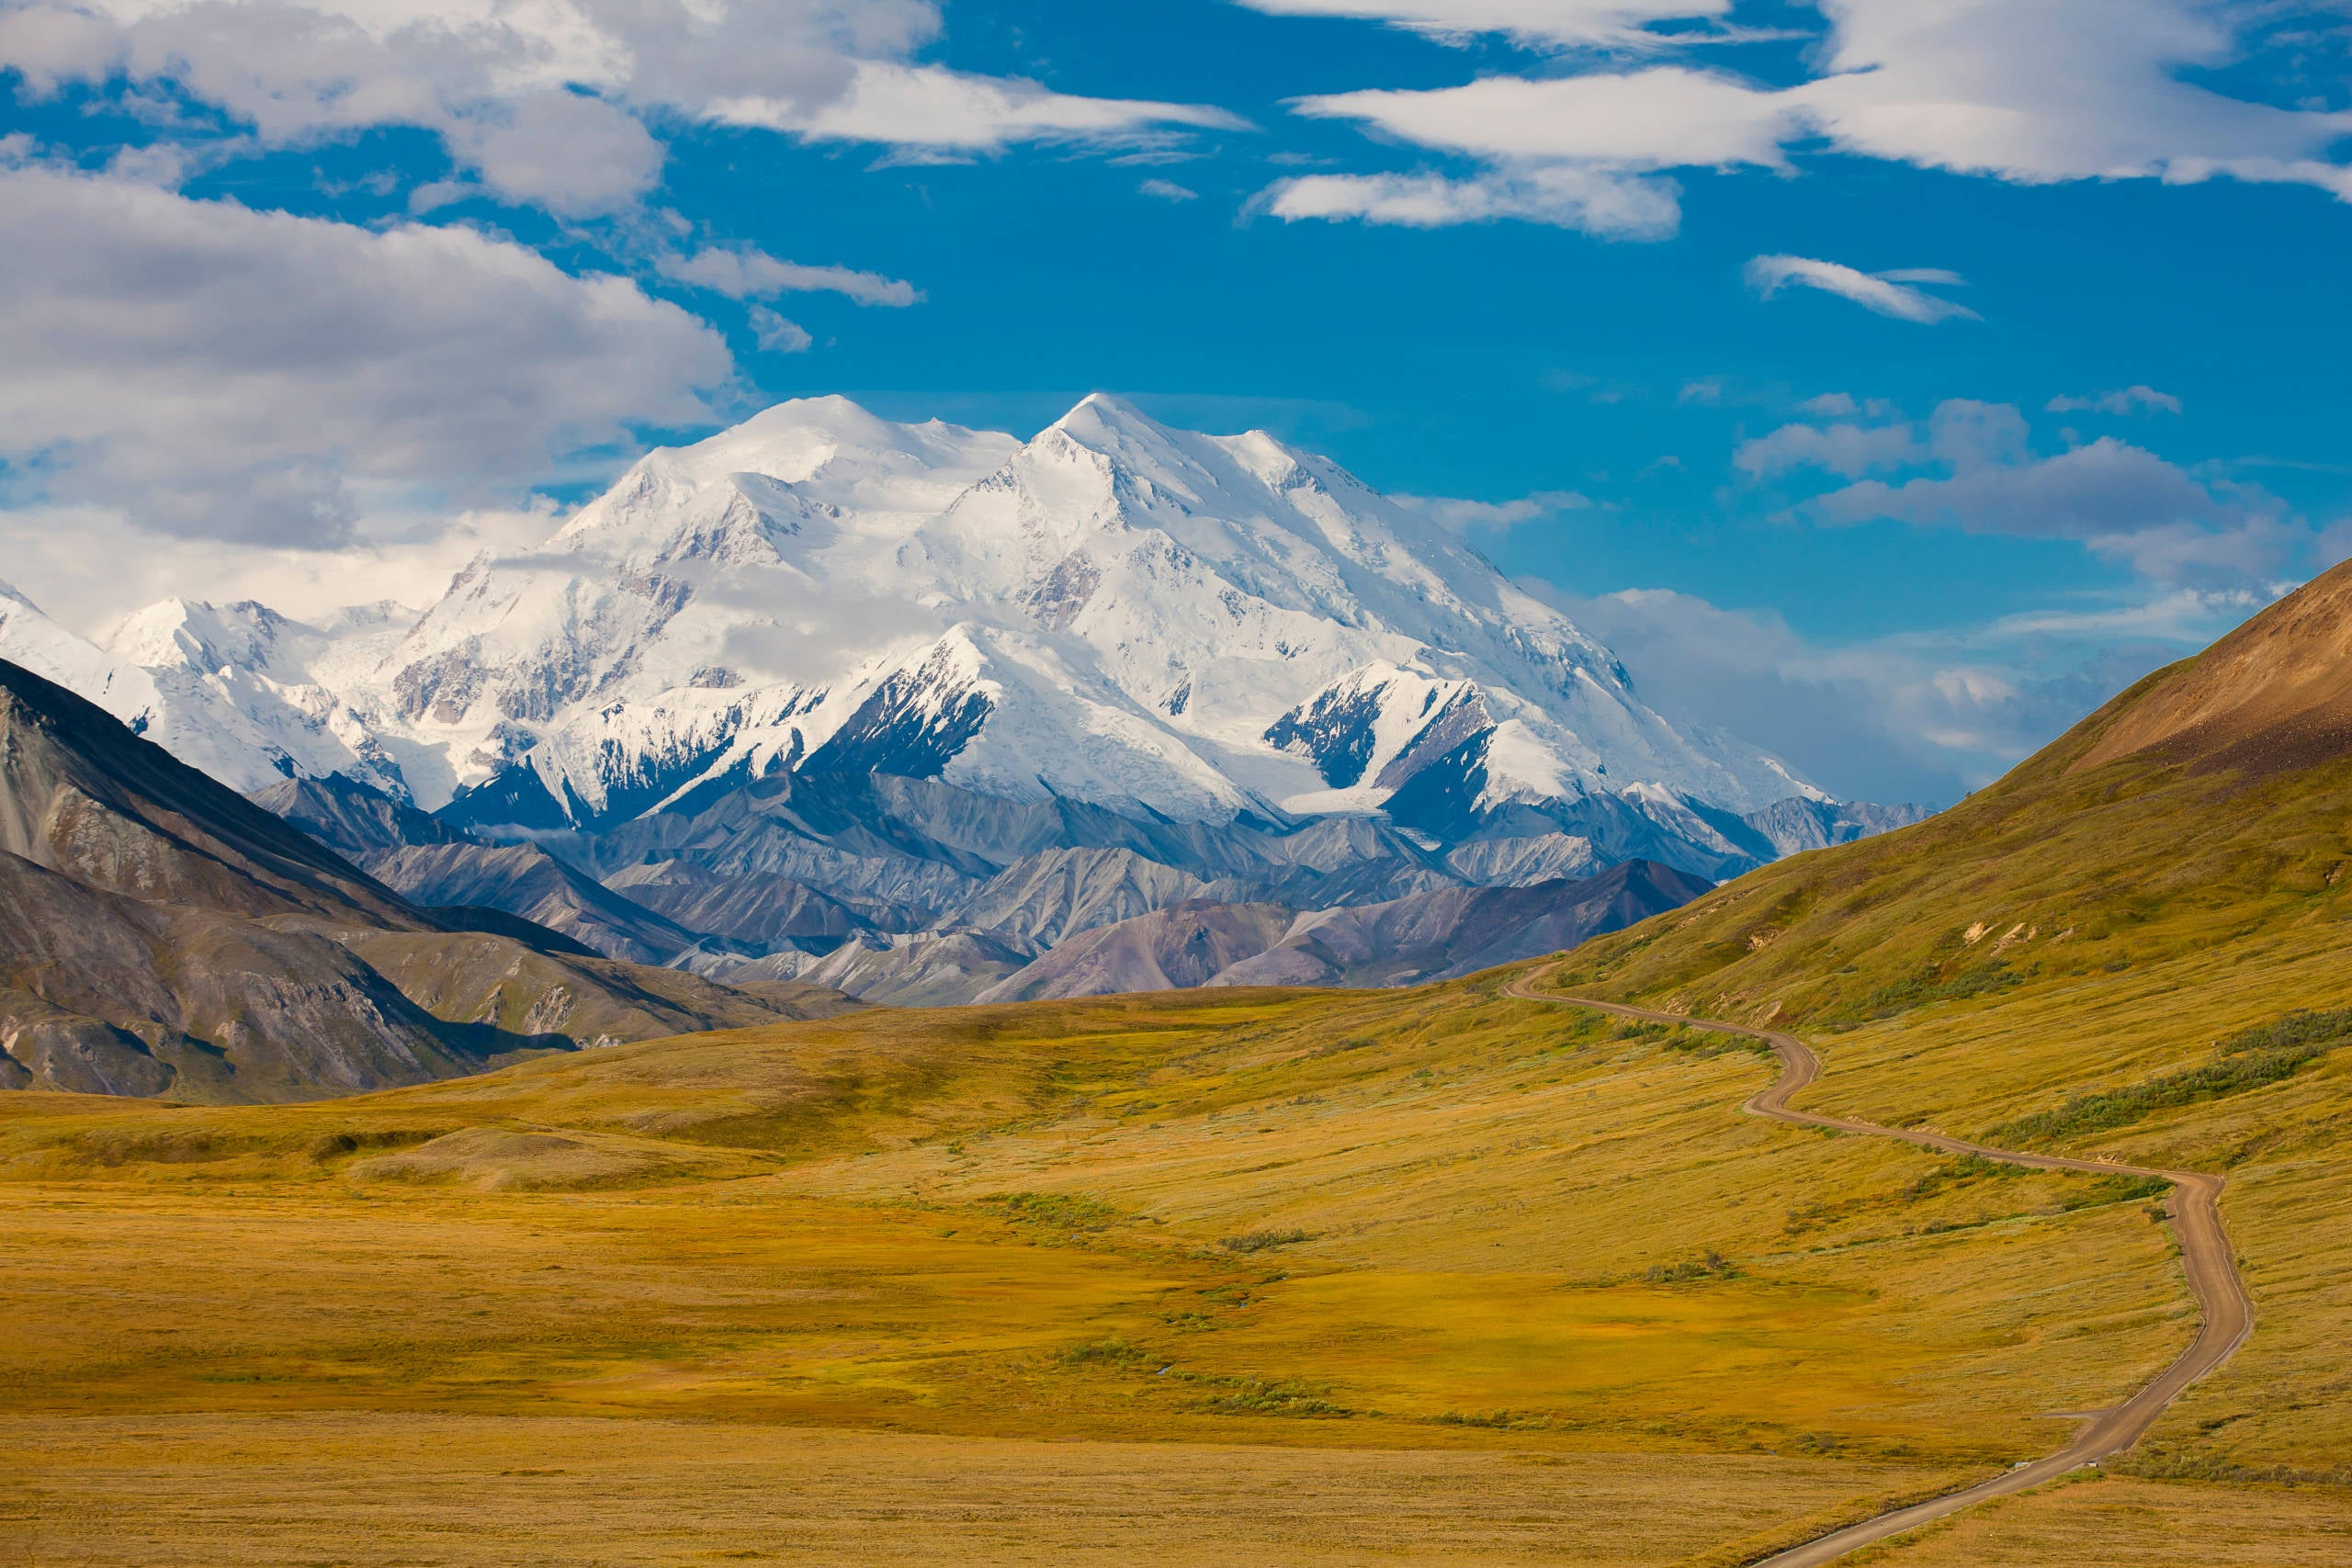 View of Denali from within Denali National Park